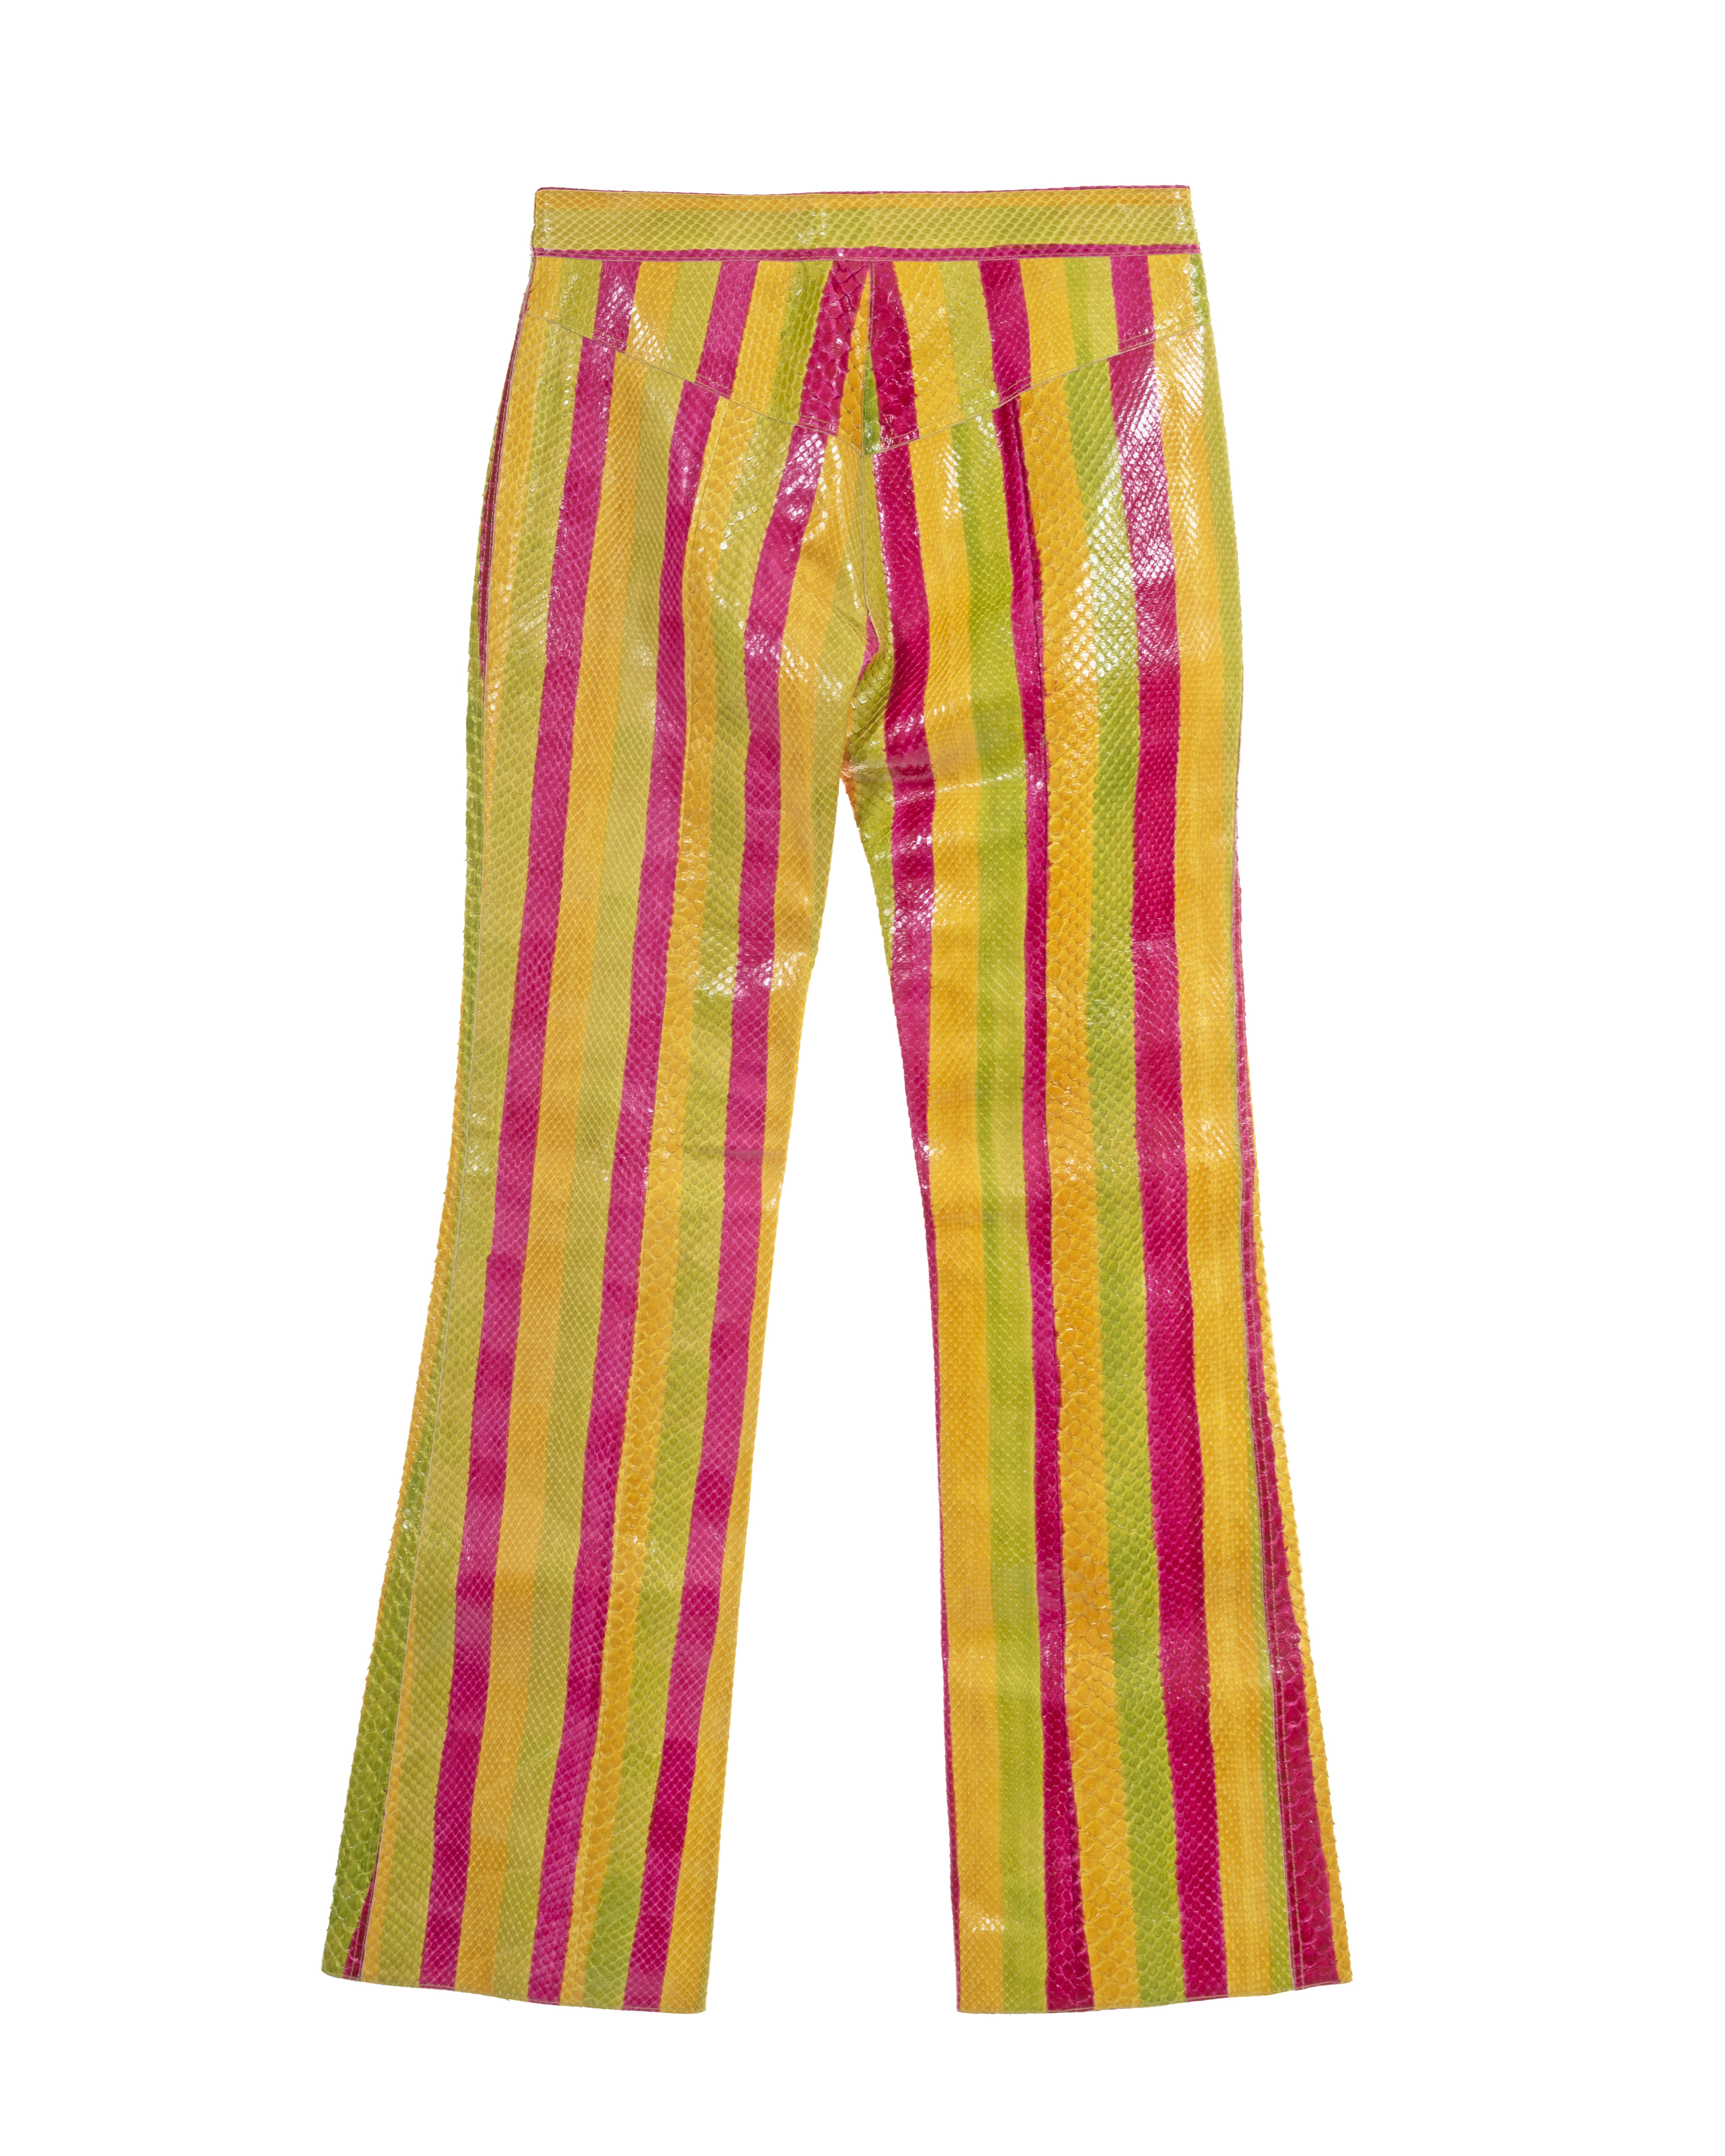 Christian Dior by John Galliano multicoloured striped python flares, ss 2002 For Sale 8